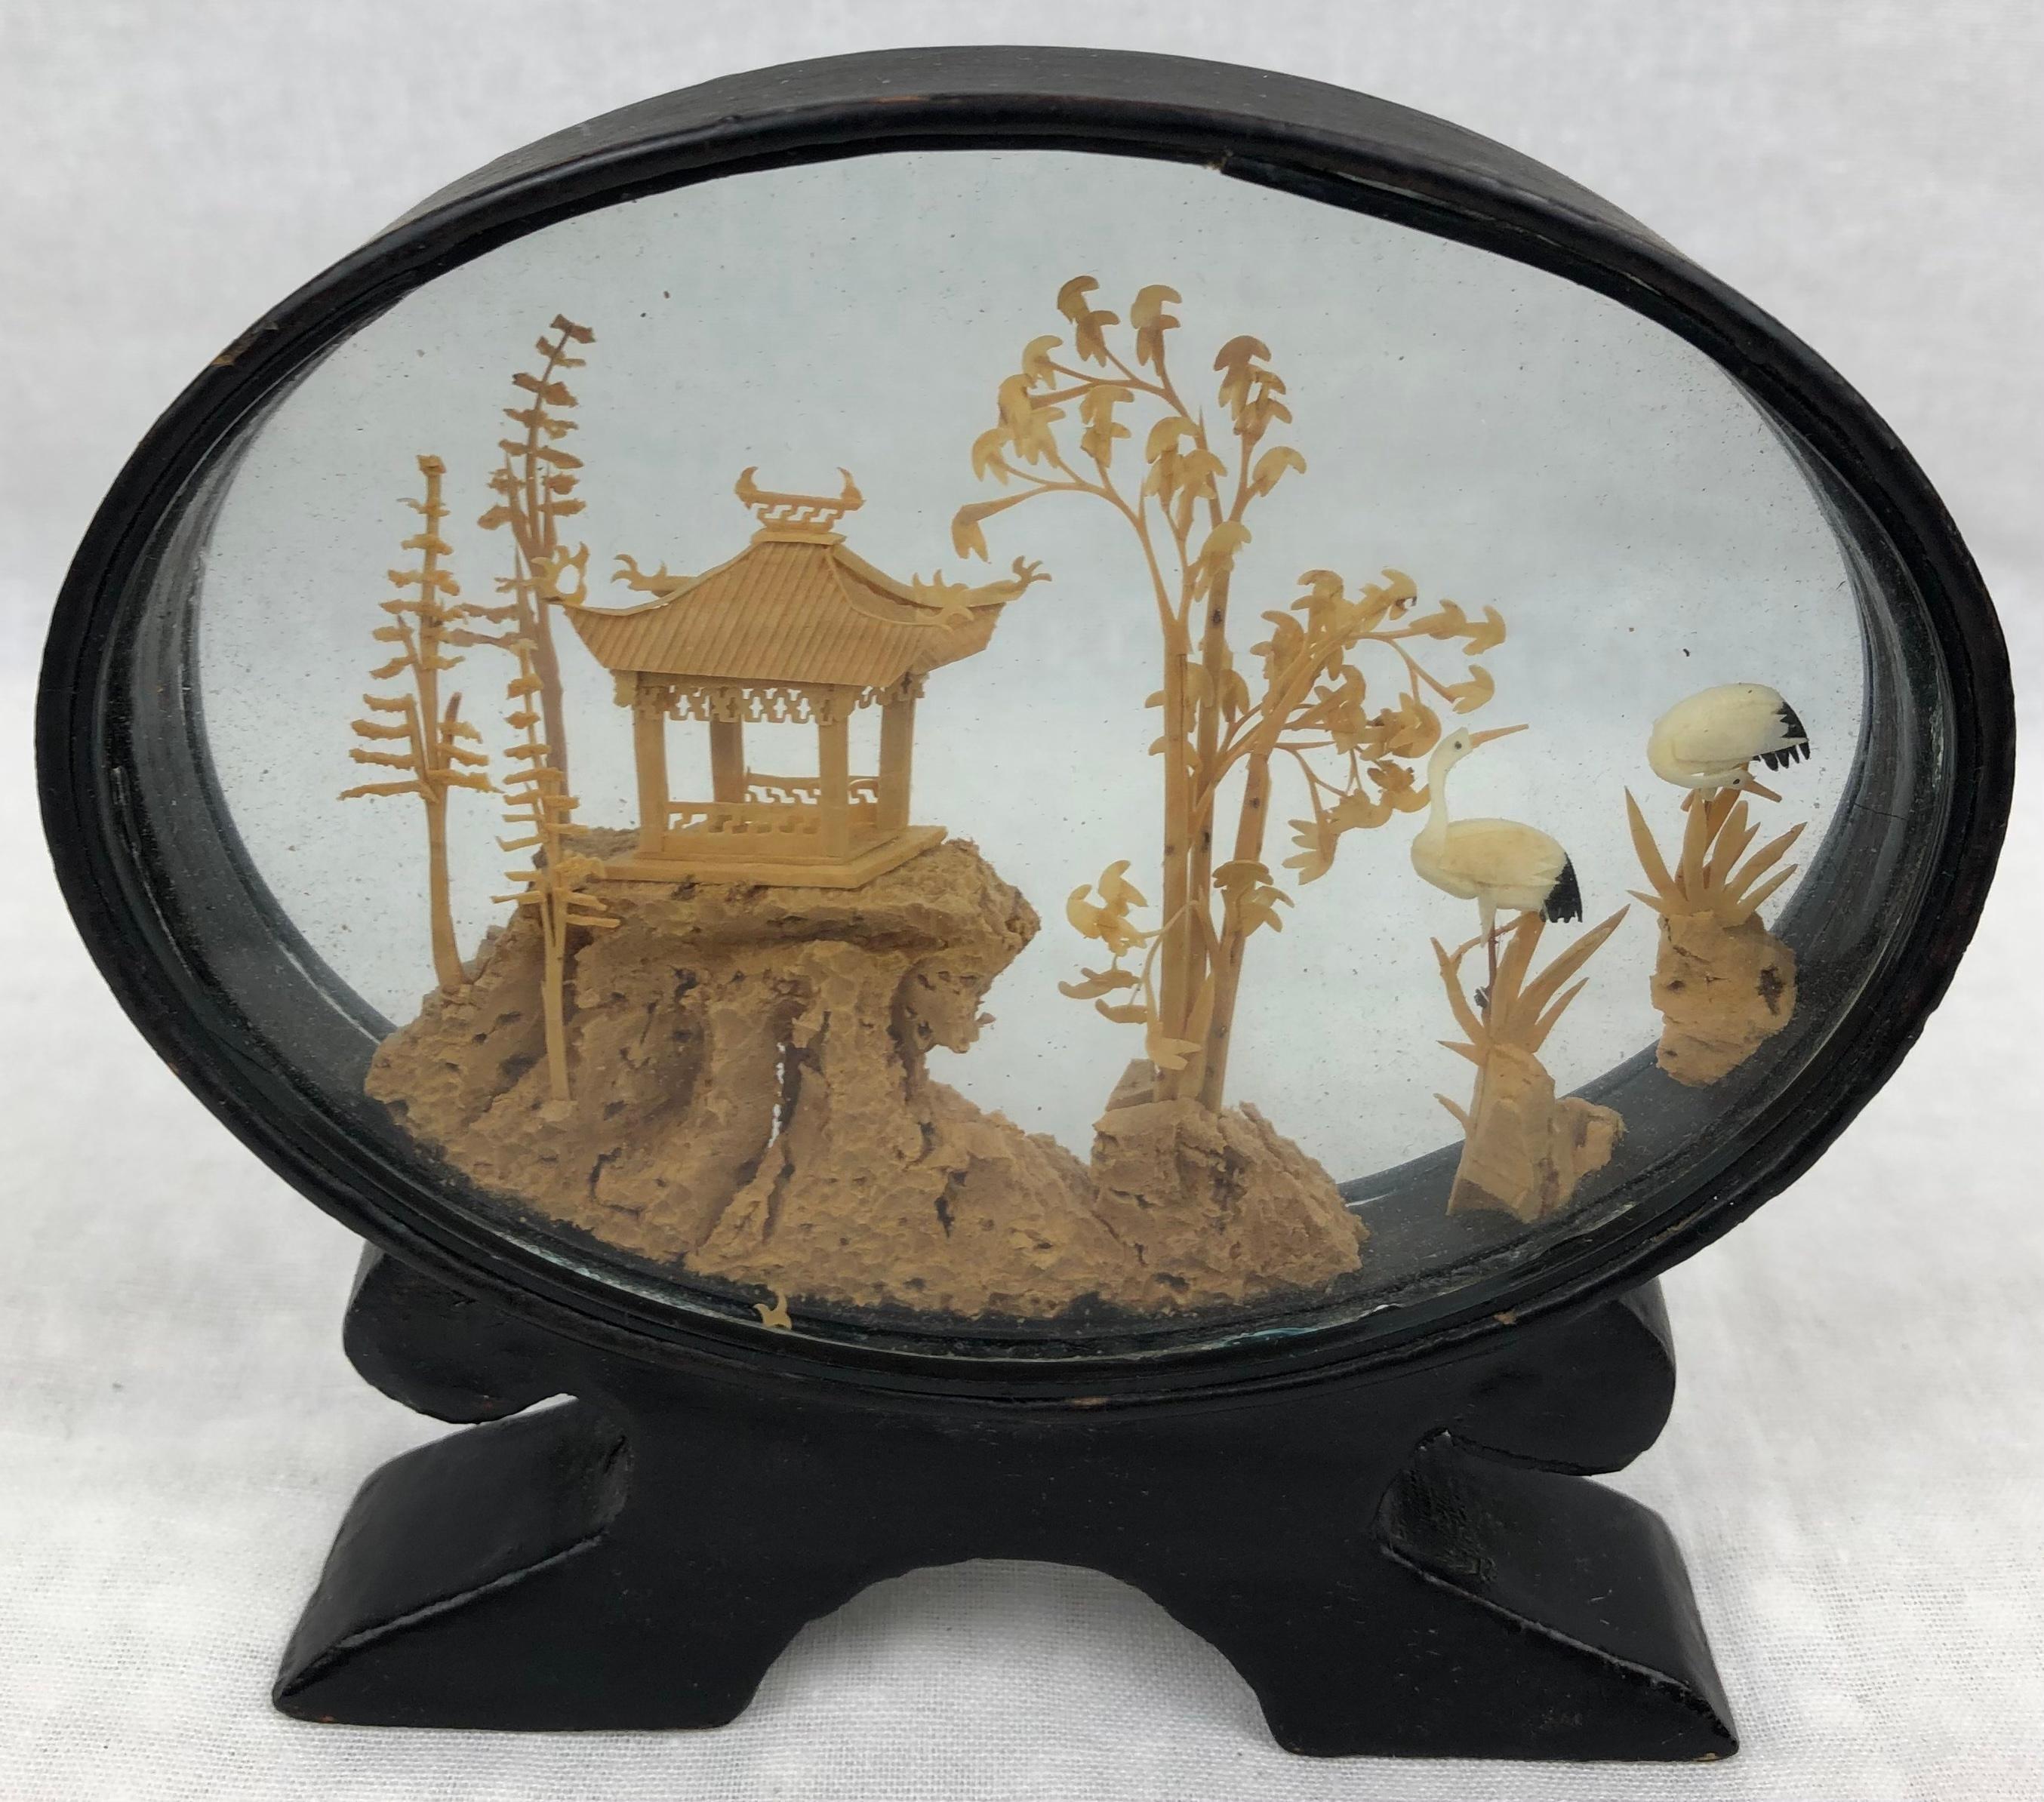 Beautiful 20th century oval Chinese cork diorama.
Finely carved decoration in a glass case and black lacquered base.
Chinese landscape view, a pagoda in a traditional garden featuring storks. 

Traditional Asian cork sculpture.